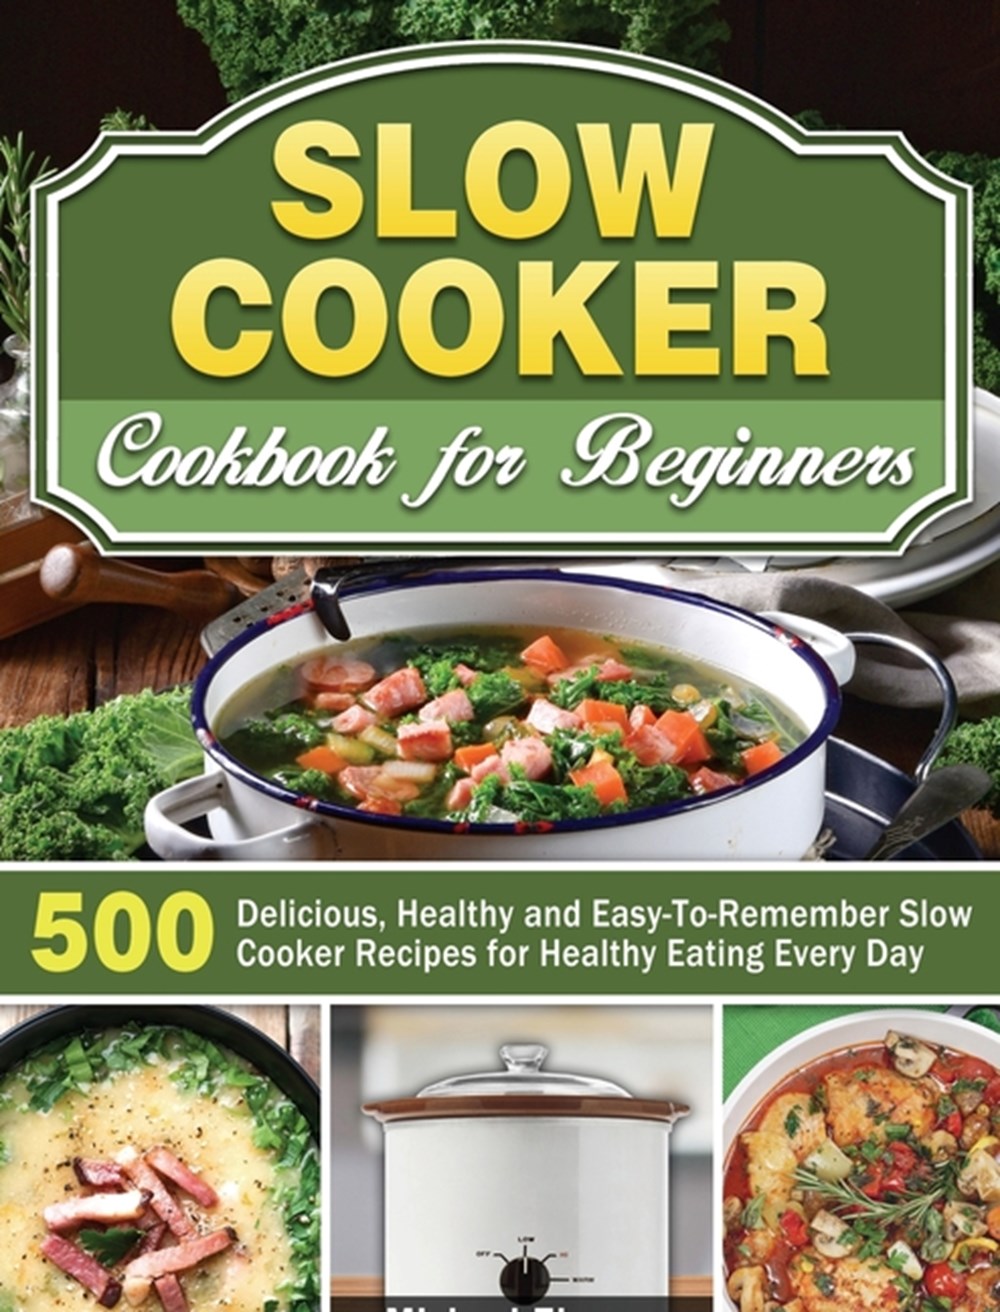 Slow Cooker Cookbook for Beginners: 500 Delicious, Healthy and Easy-To-Remember Slow Cooker Recipes 